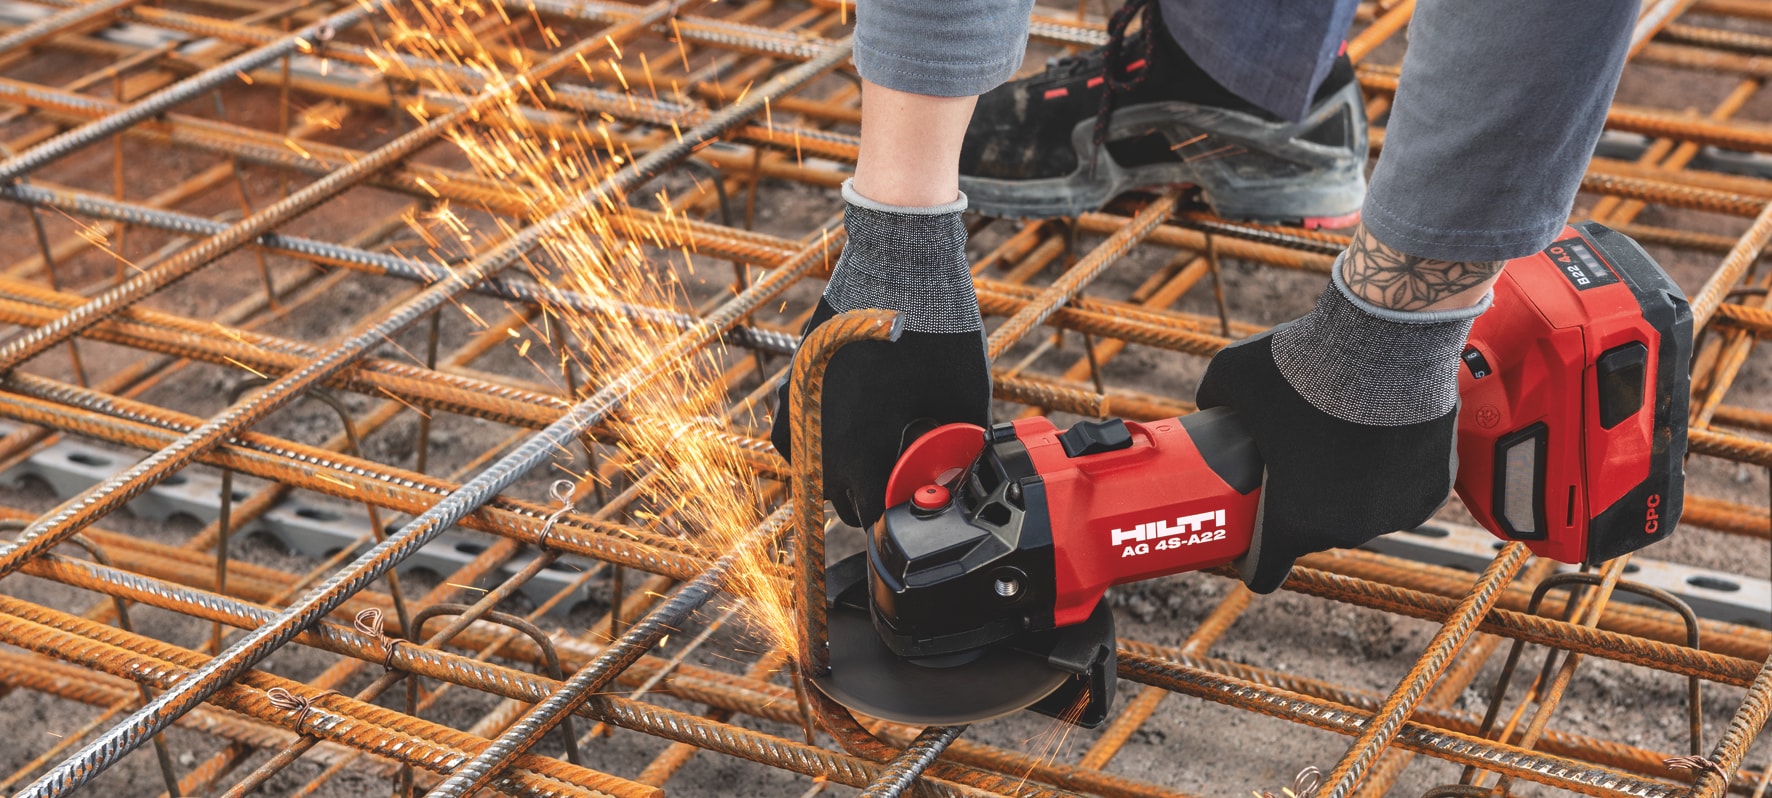 Hilti's cordless angle grinders AG 4S-A22 for everyday cutting and grinding